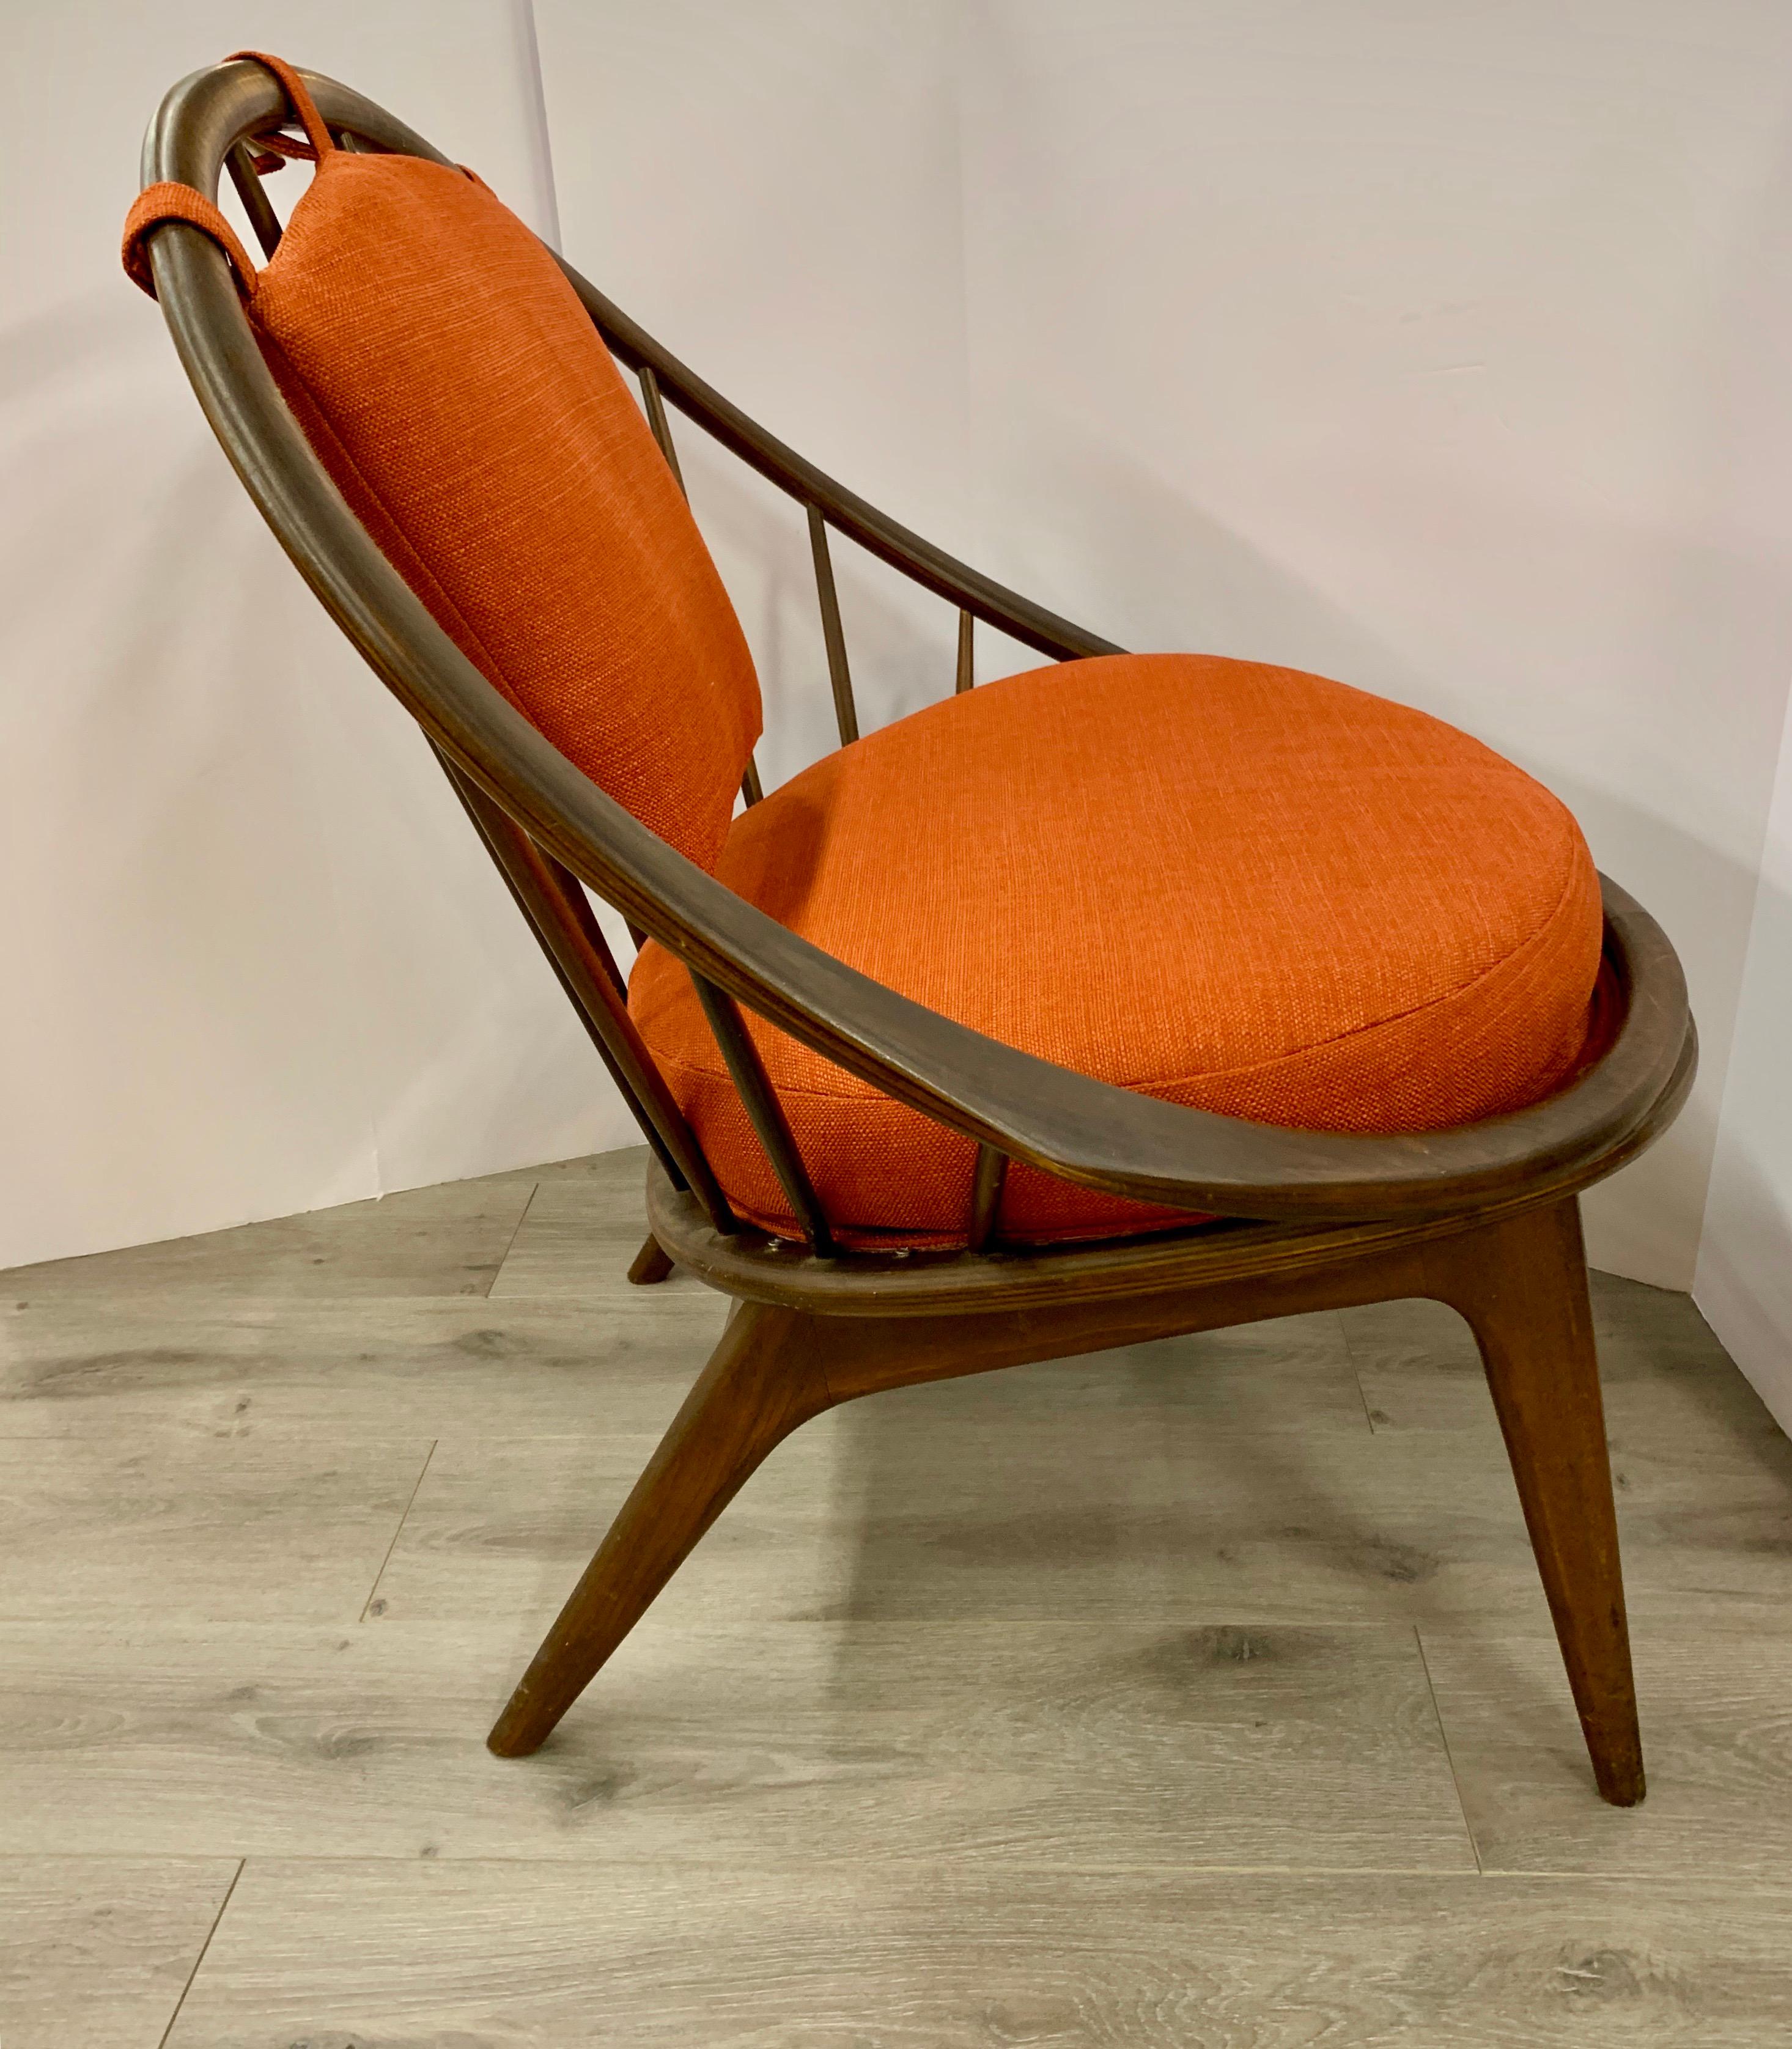 Midcentury hoop chair by Ib Kofod-Larsen for Selig is highly collectible with a spindle back design and gorgeous contours. Newly upholstered in an orange linen fabric.